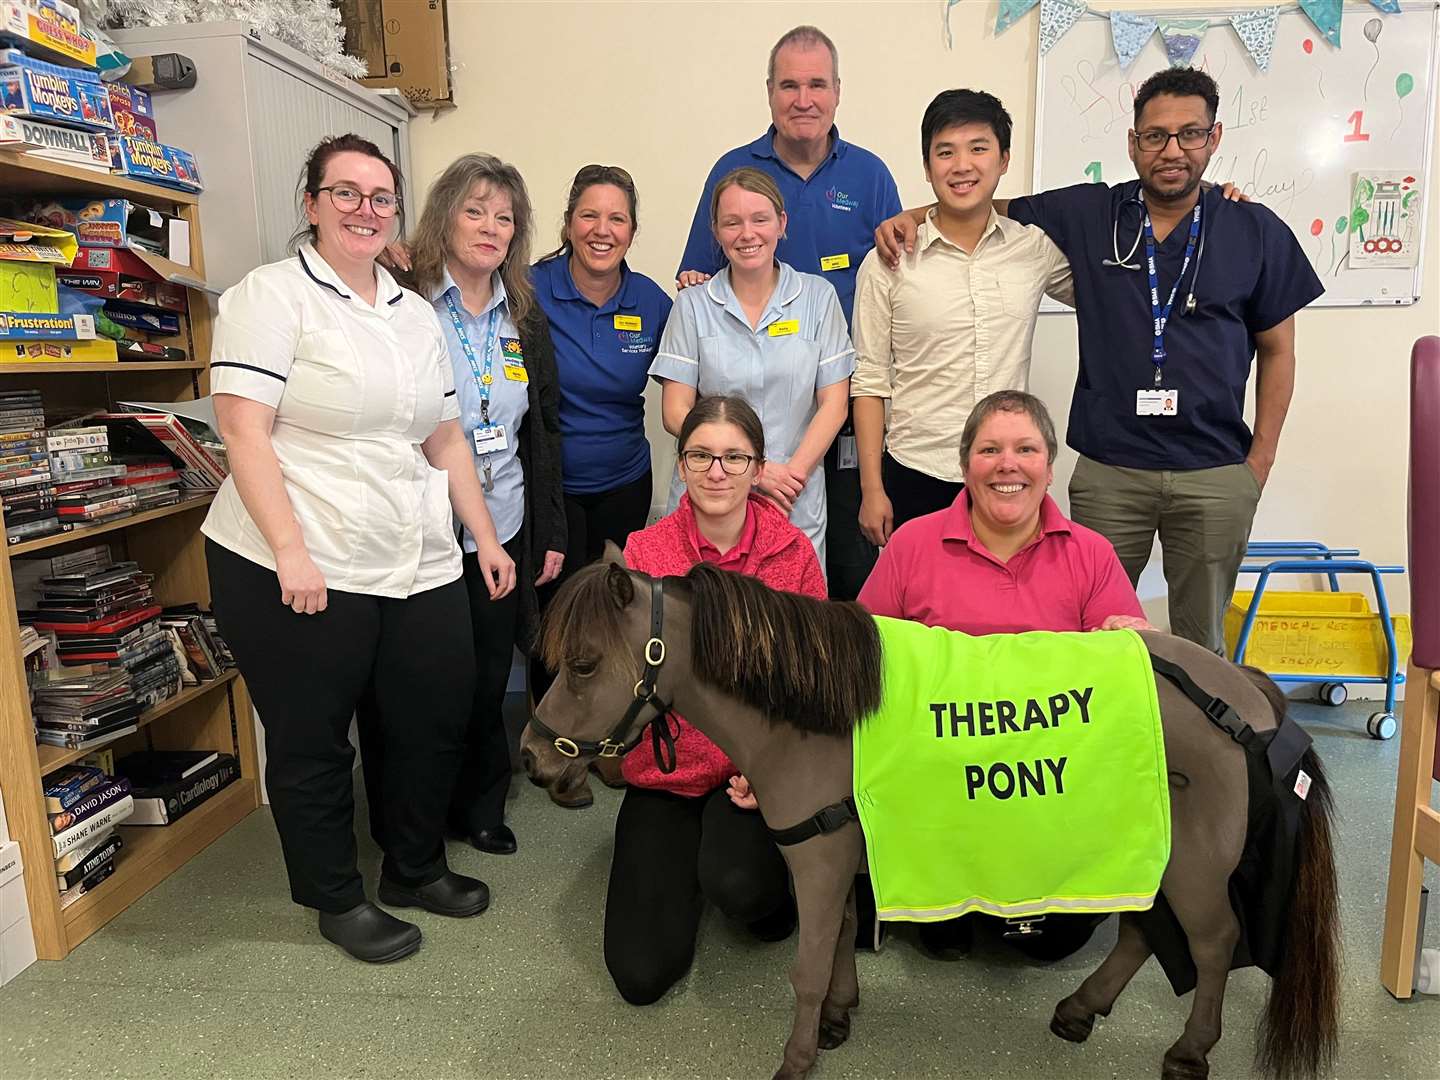 Therapy pony George with his owner Michelle (bottom right) and staff and volunteers from the Sheppey frailty unit